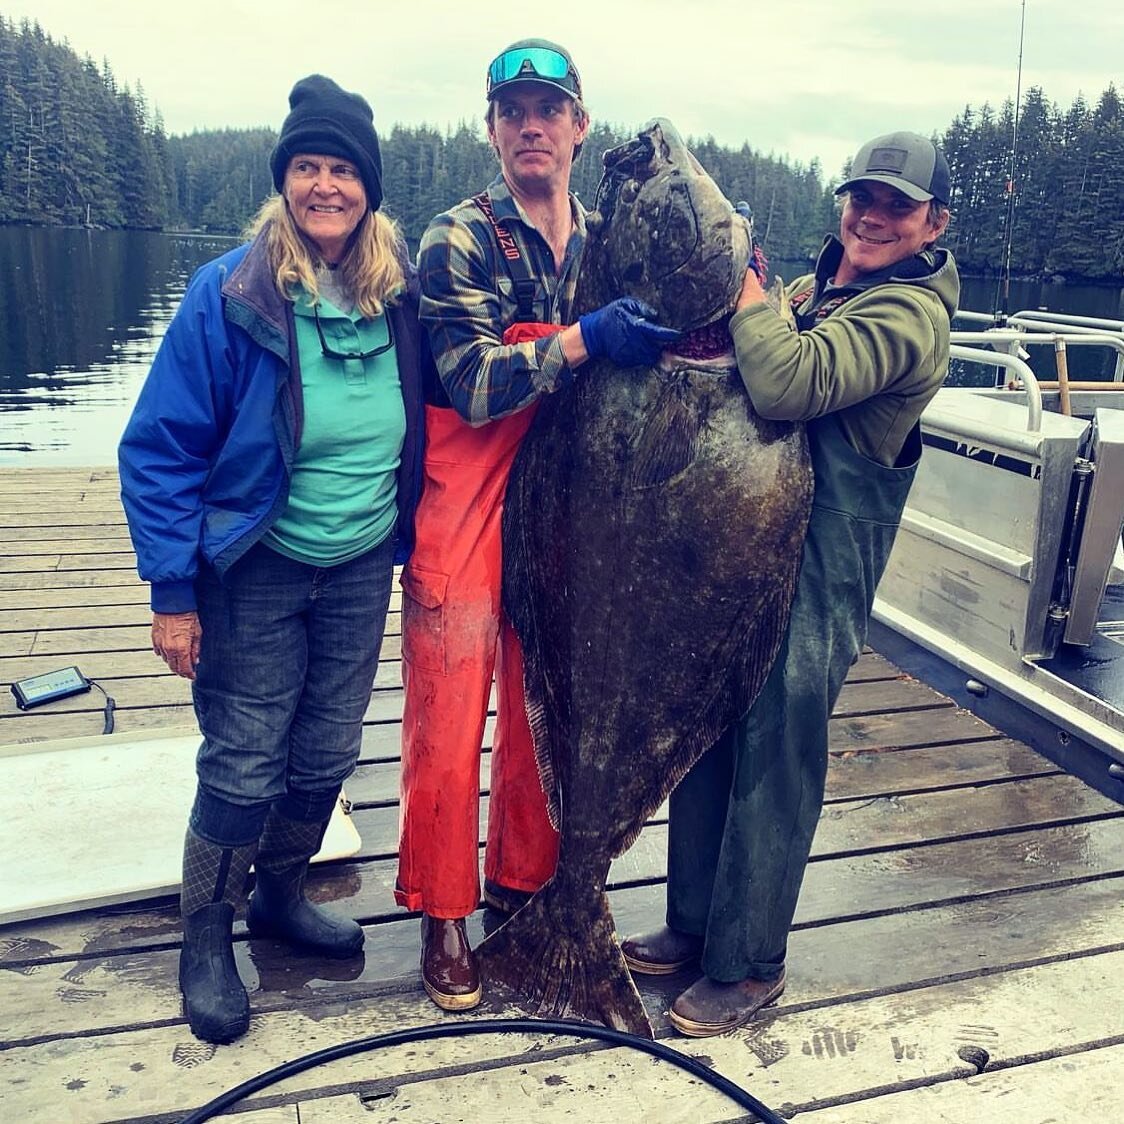 Our guest Ruth caught a 160 pound halibut a few days ago with Captain Morgan and Adam&hellip;not bad!
#afognakwildernesslodge #halibutfishing #remotelodge #fishalaska